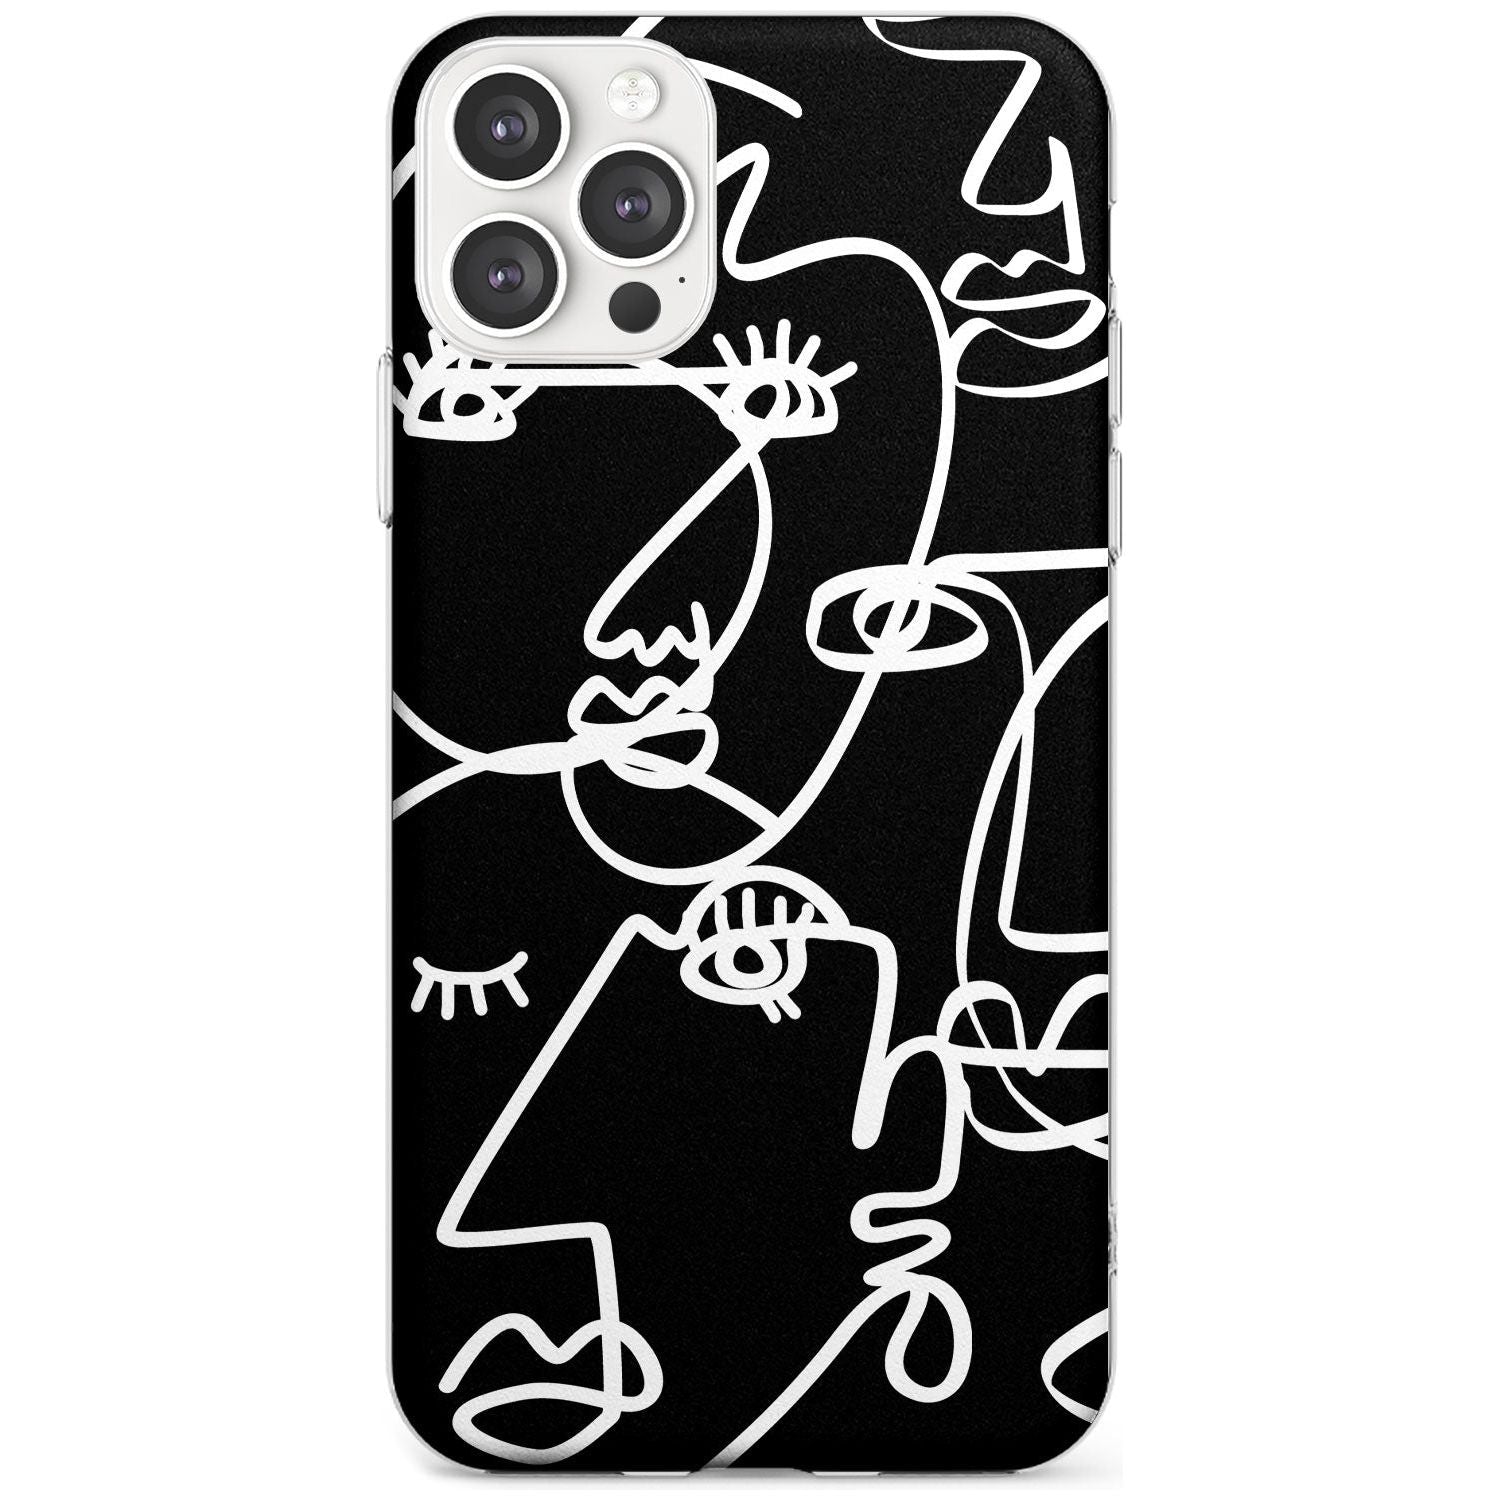 Continuous Line Faces: White on Black Black Impact Phone Case for iPhone 11 Pro Max